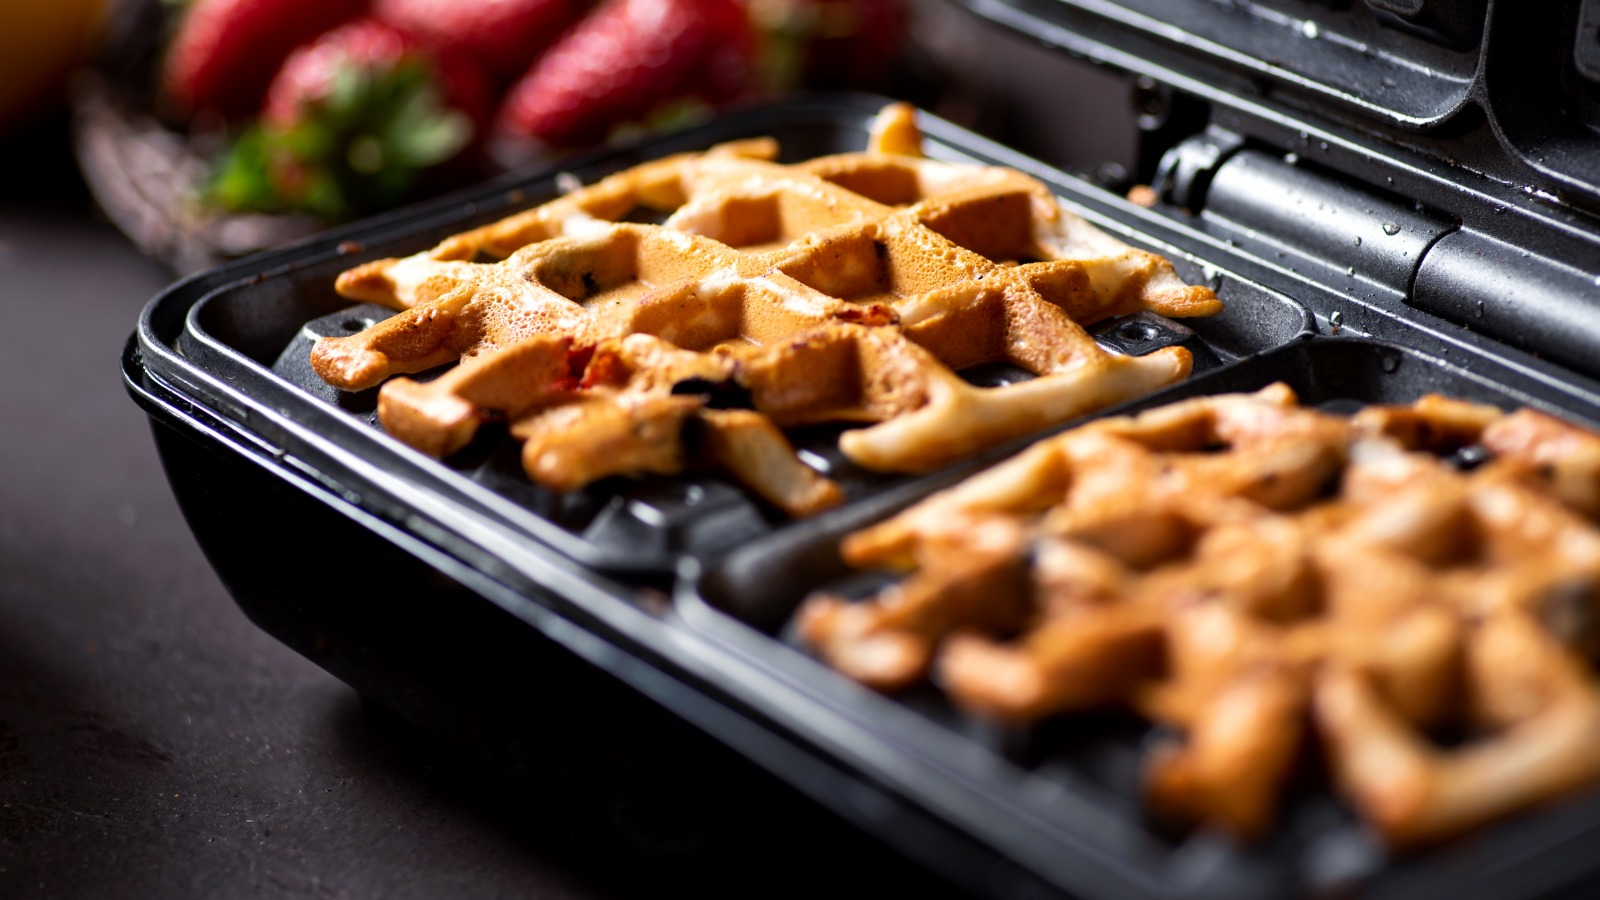 You've Been Cleaning Your Waffle Maker Wrong This Whole Time